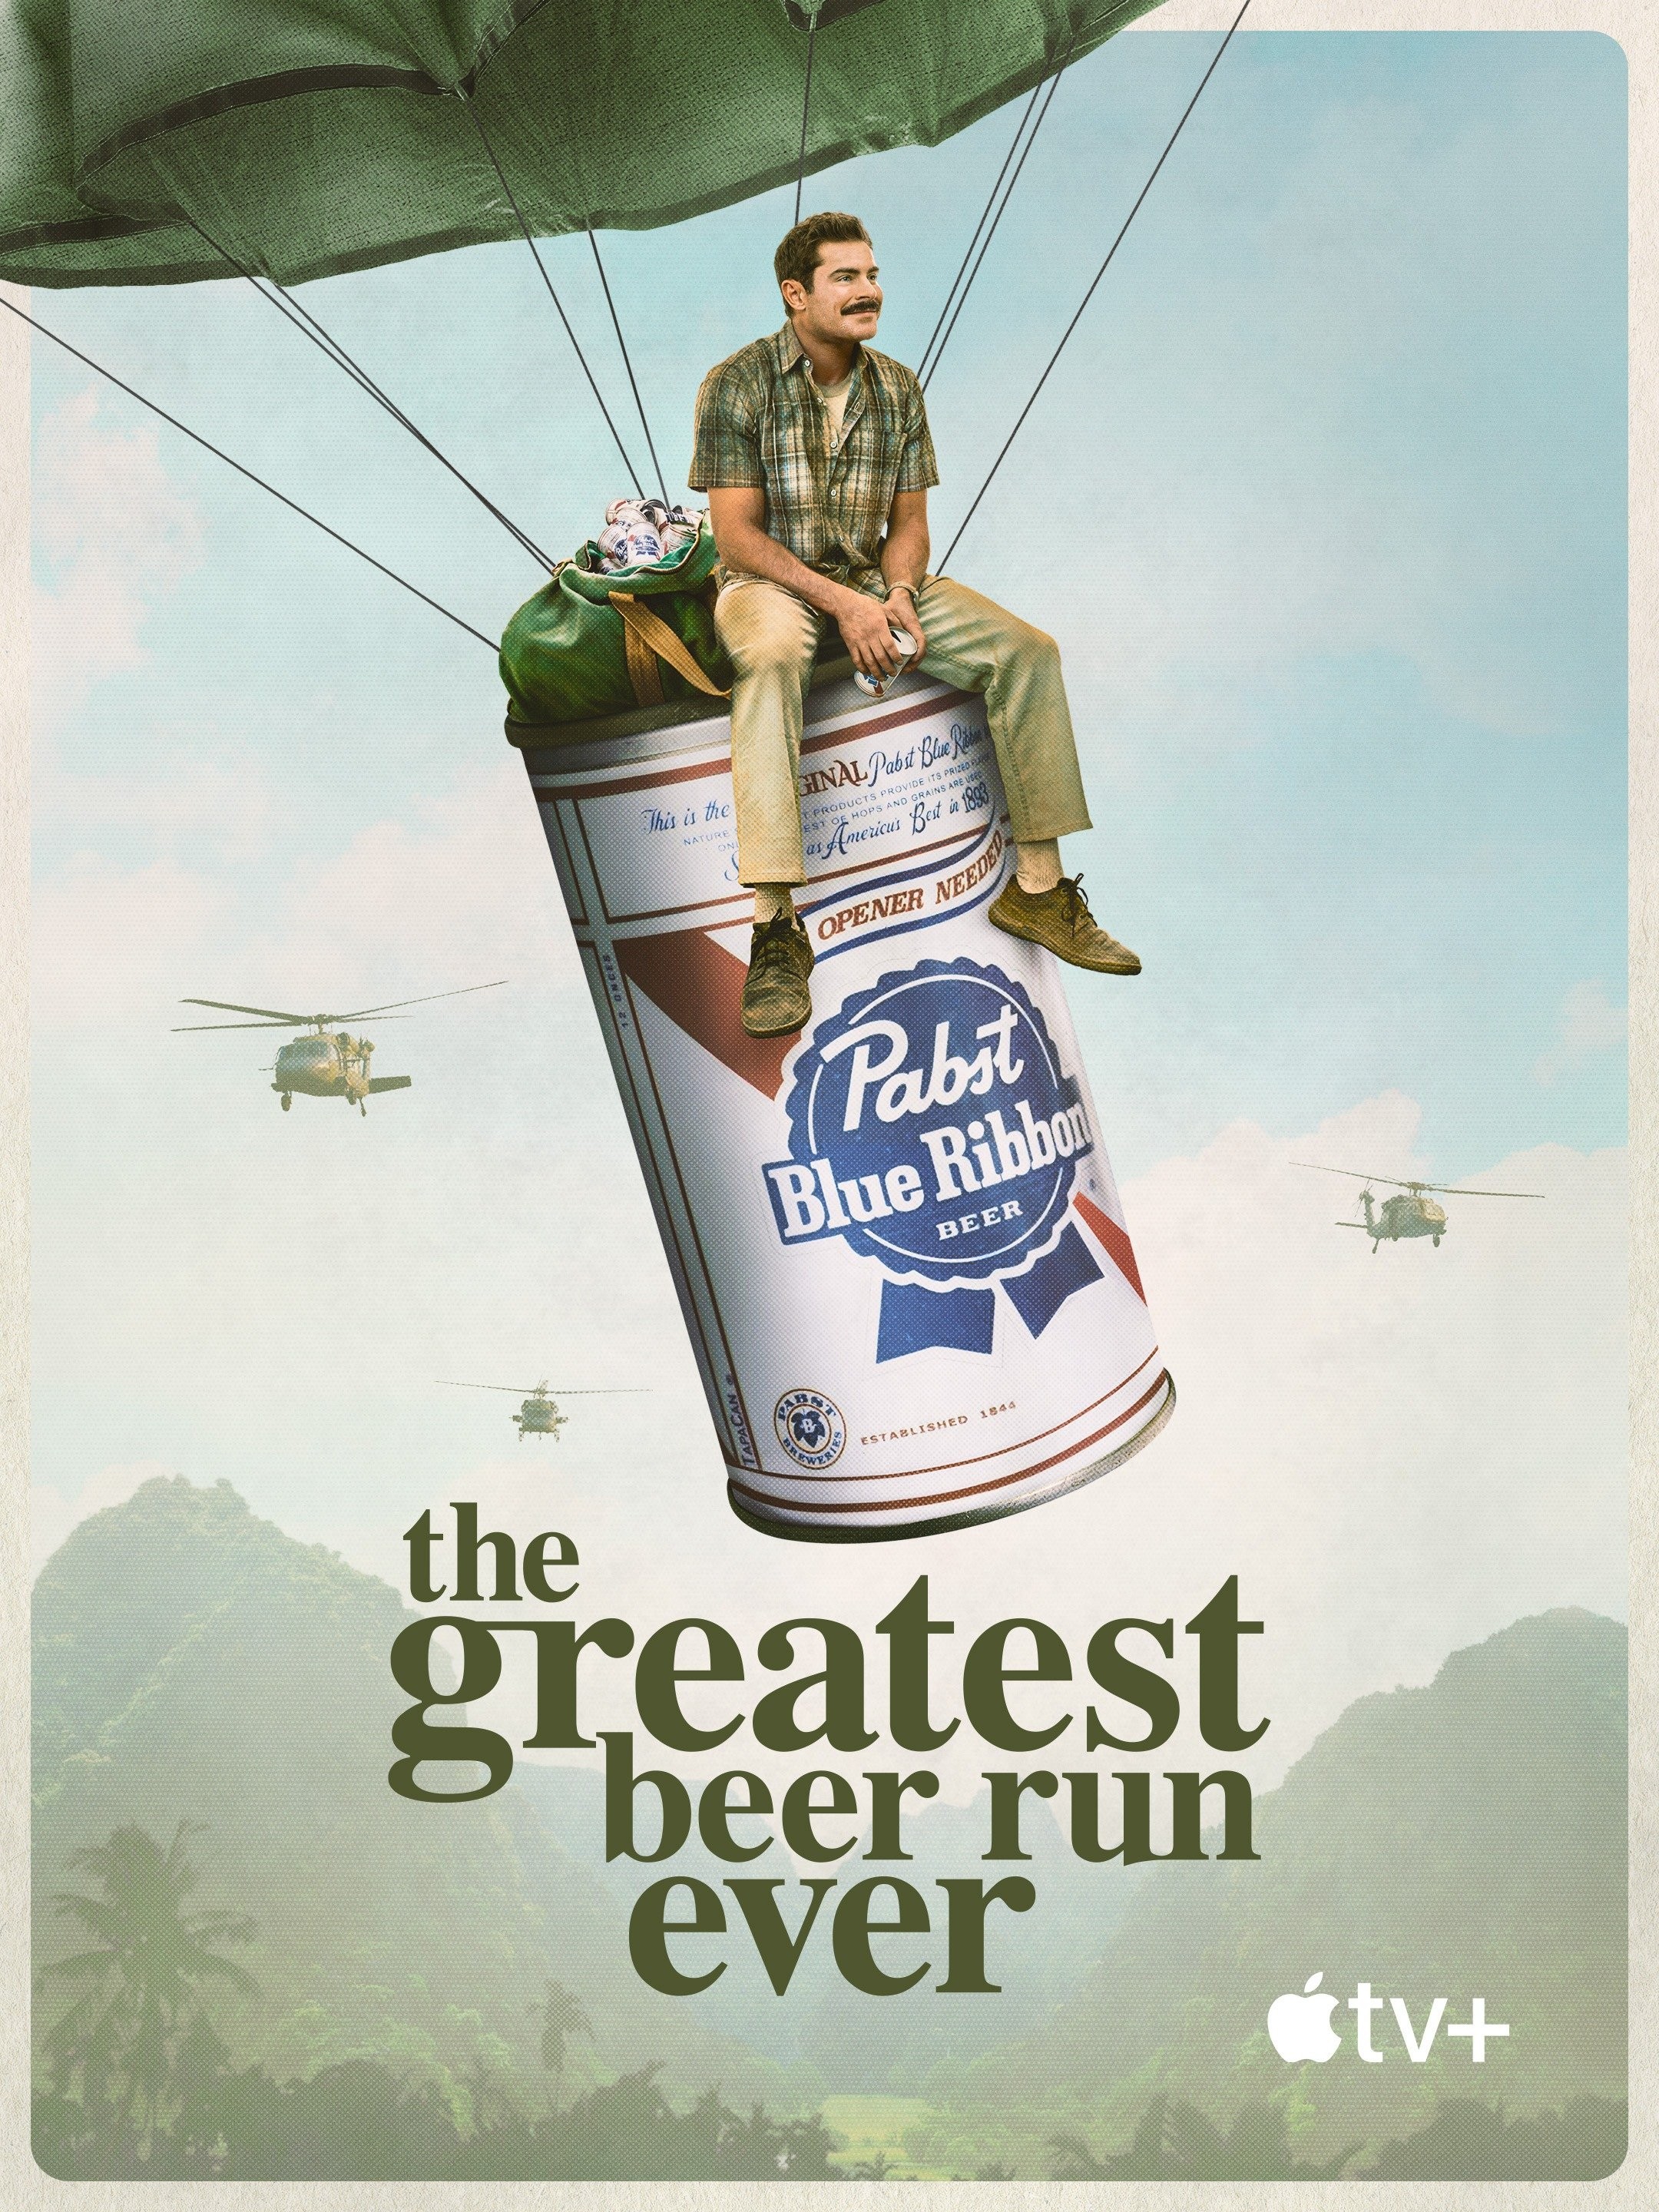 The Greatest Beer Run Ever - Wikipedia